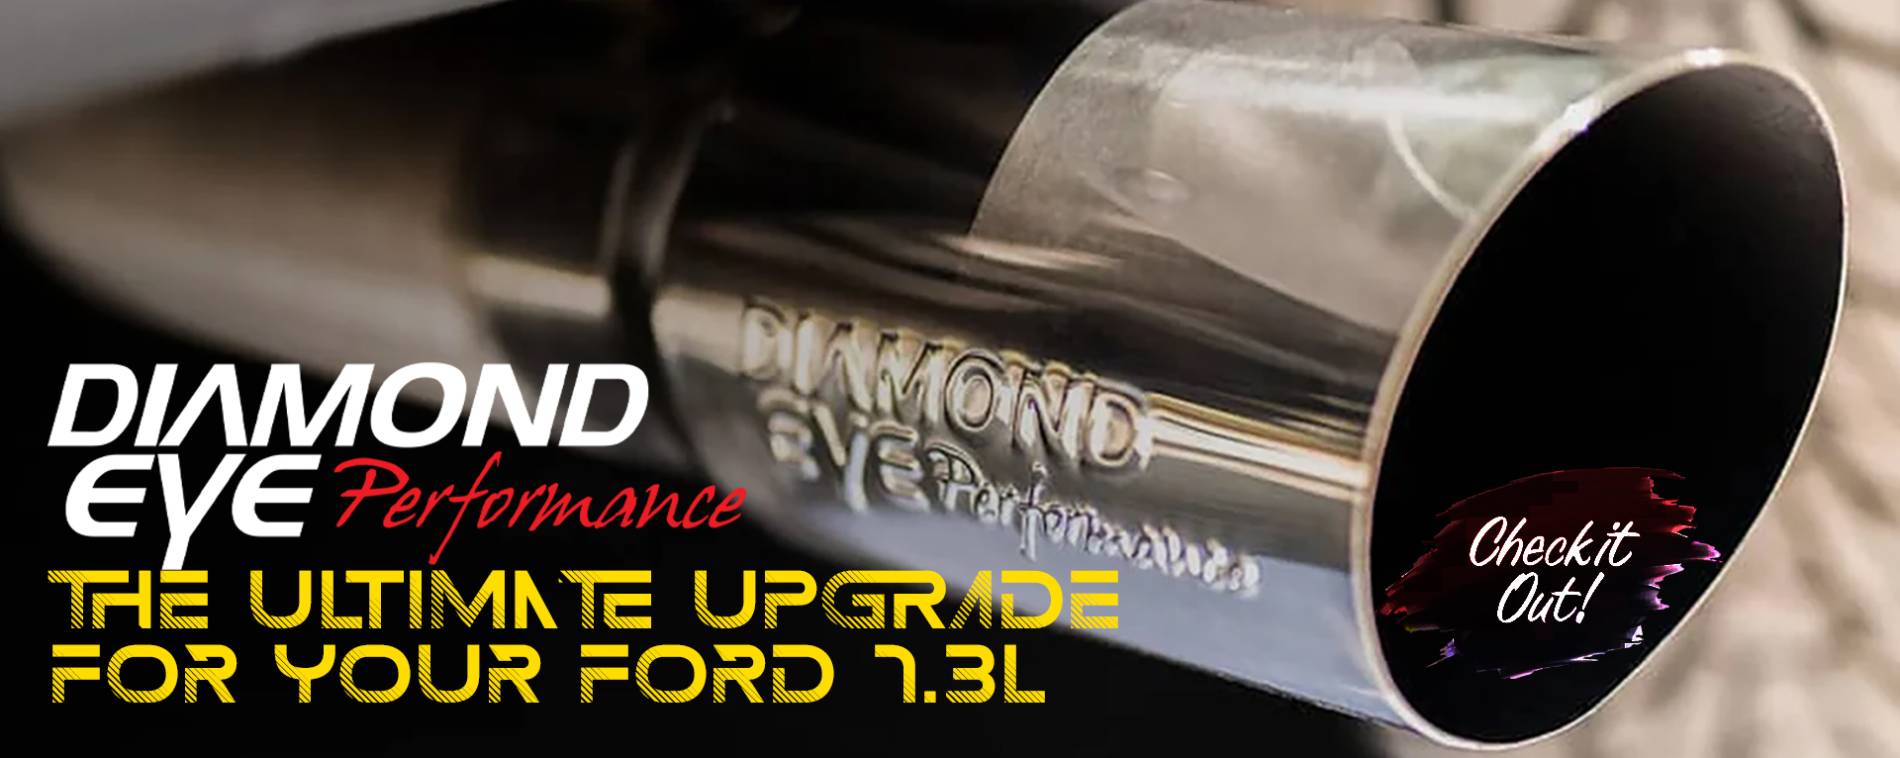 The Ultimate Upgrade for your Ford 7.3L